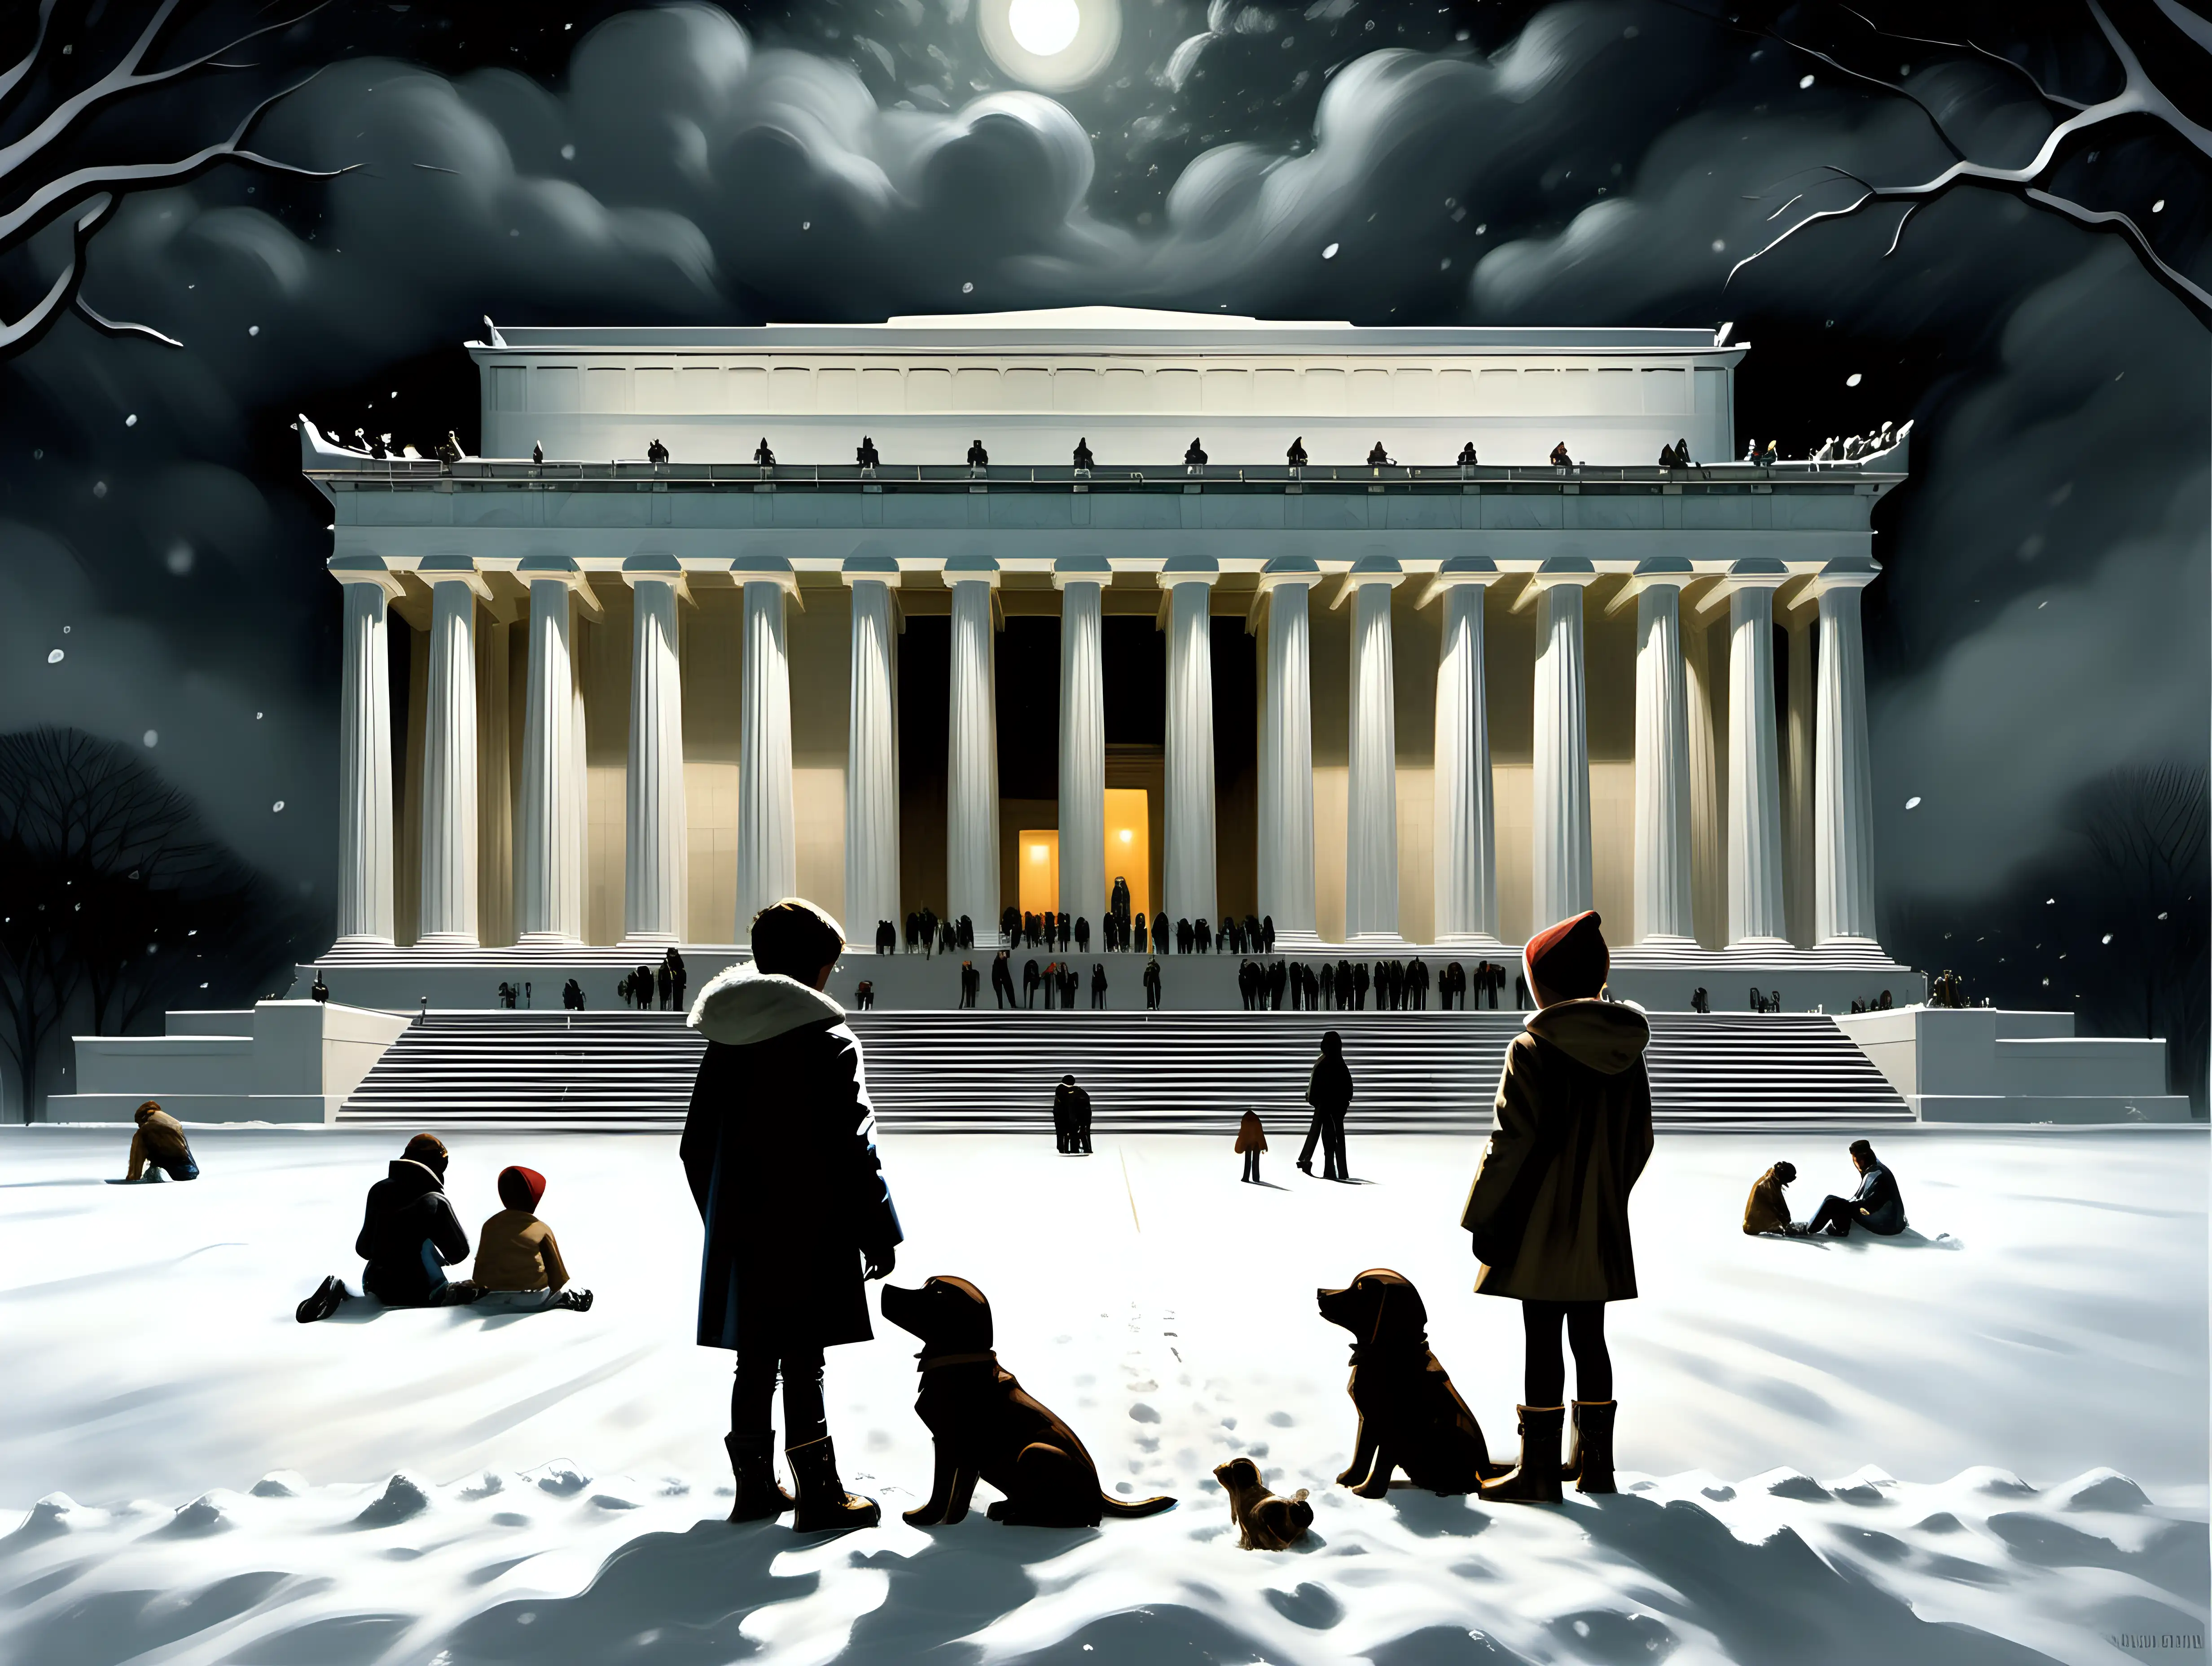 Nighttime Delight Children with Puppy at Lincoln Memorial in Snowstorm Frank Frazetta Inspired Art